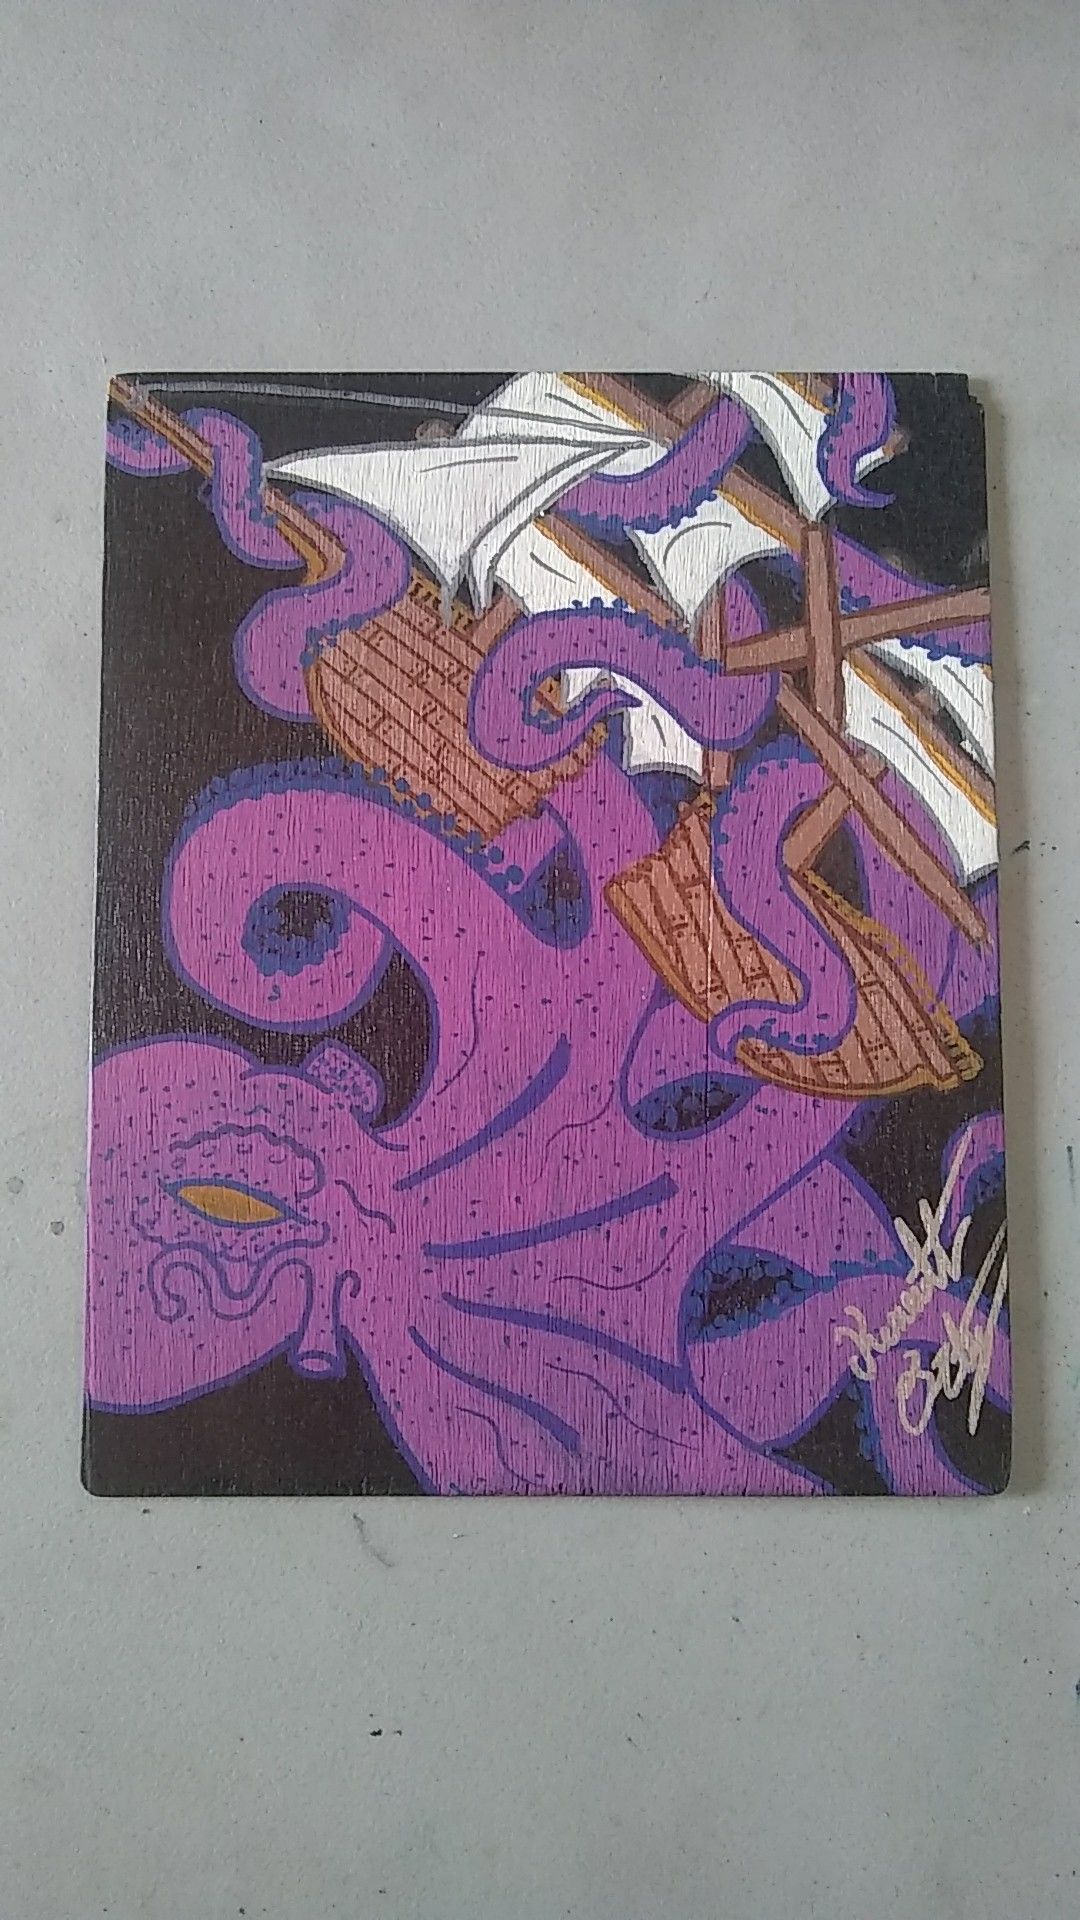 Octopus painting on wood